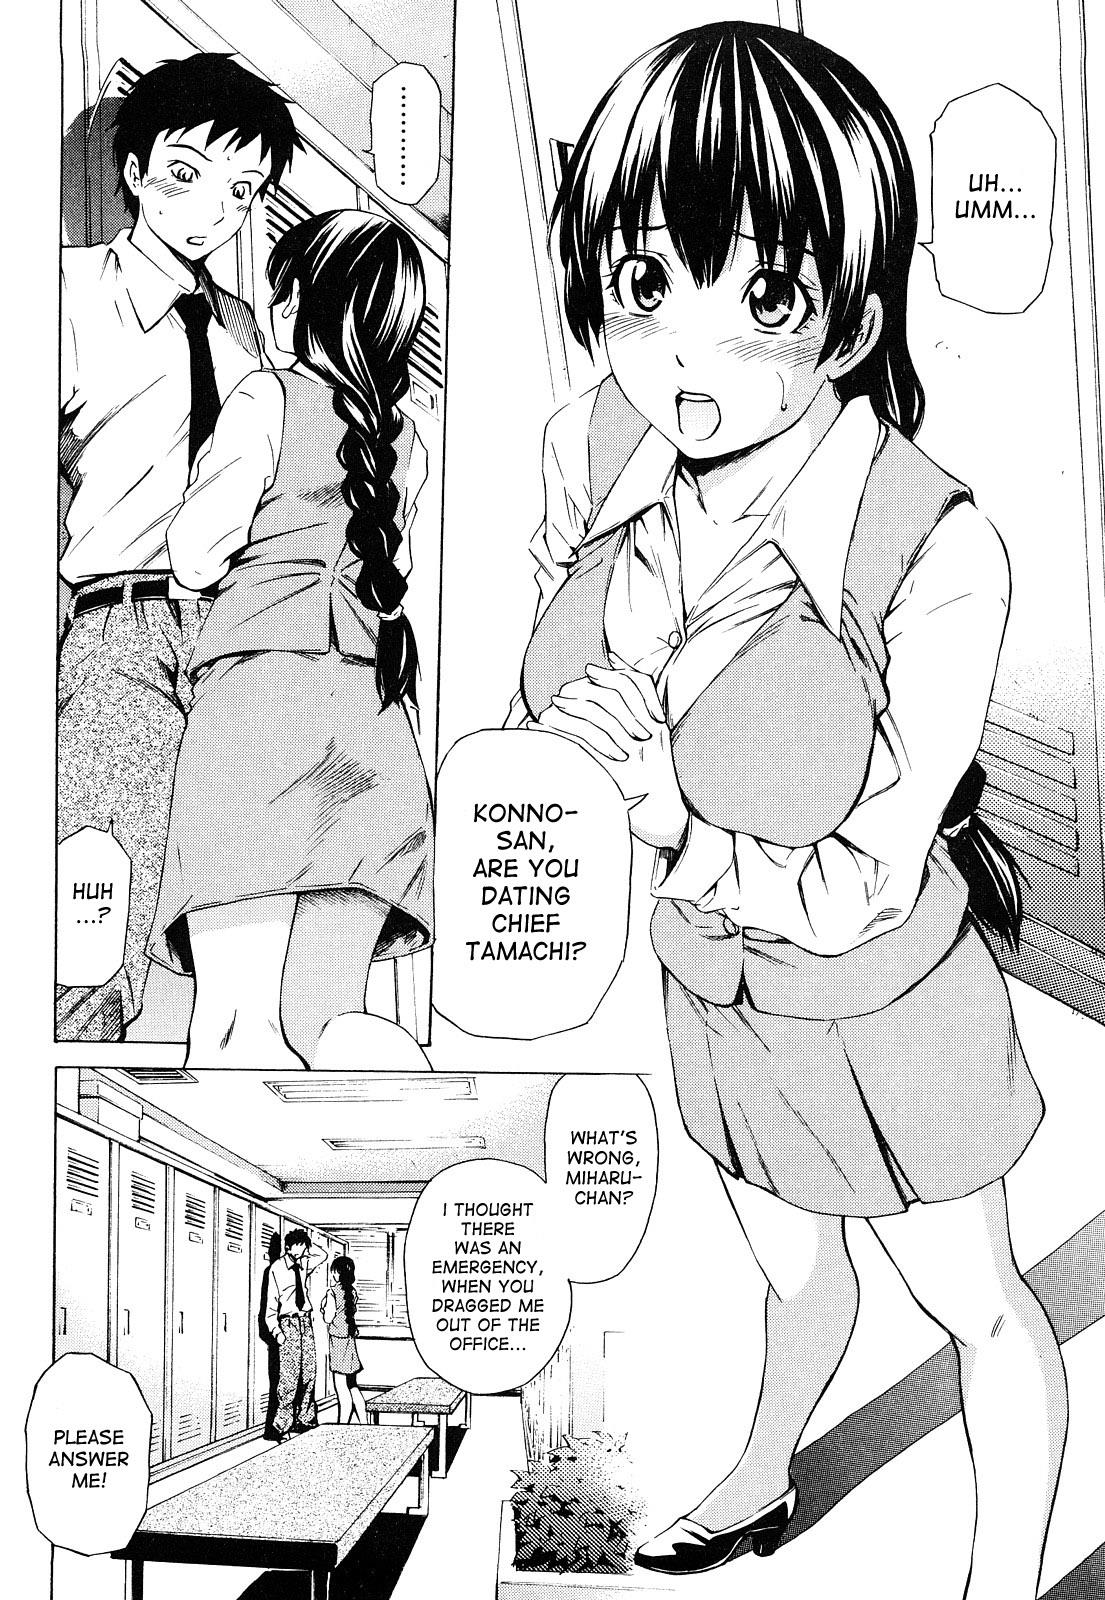 Mitsudaku Kanojo Vol.1 Chapter 12: Good Intentions, Acts, And The Changing Room - Picture 2